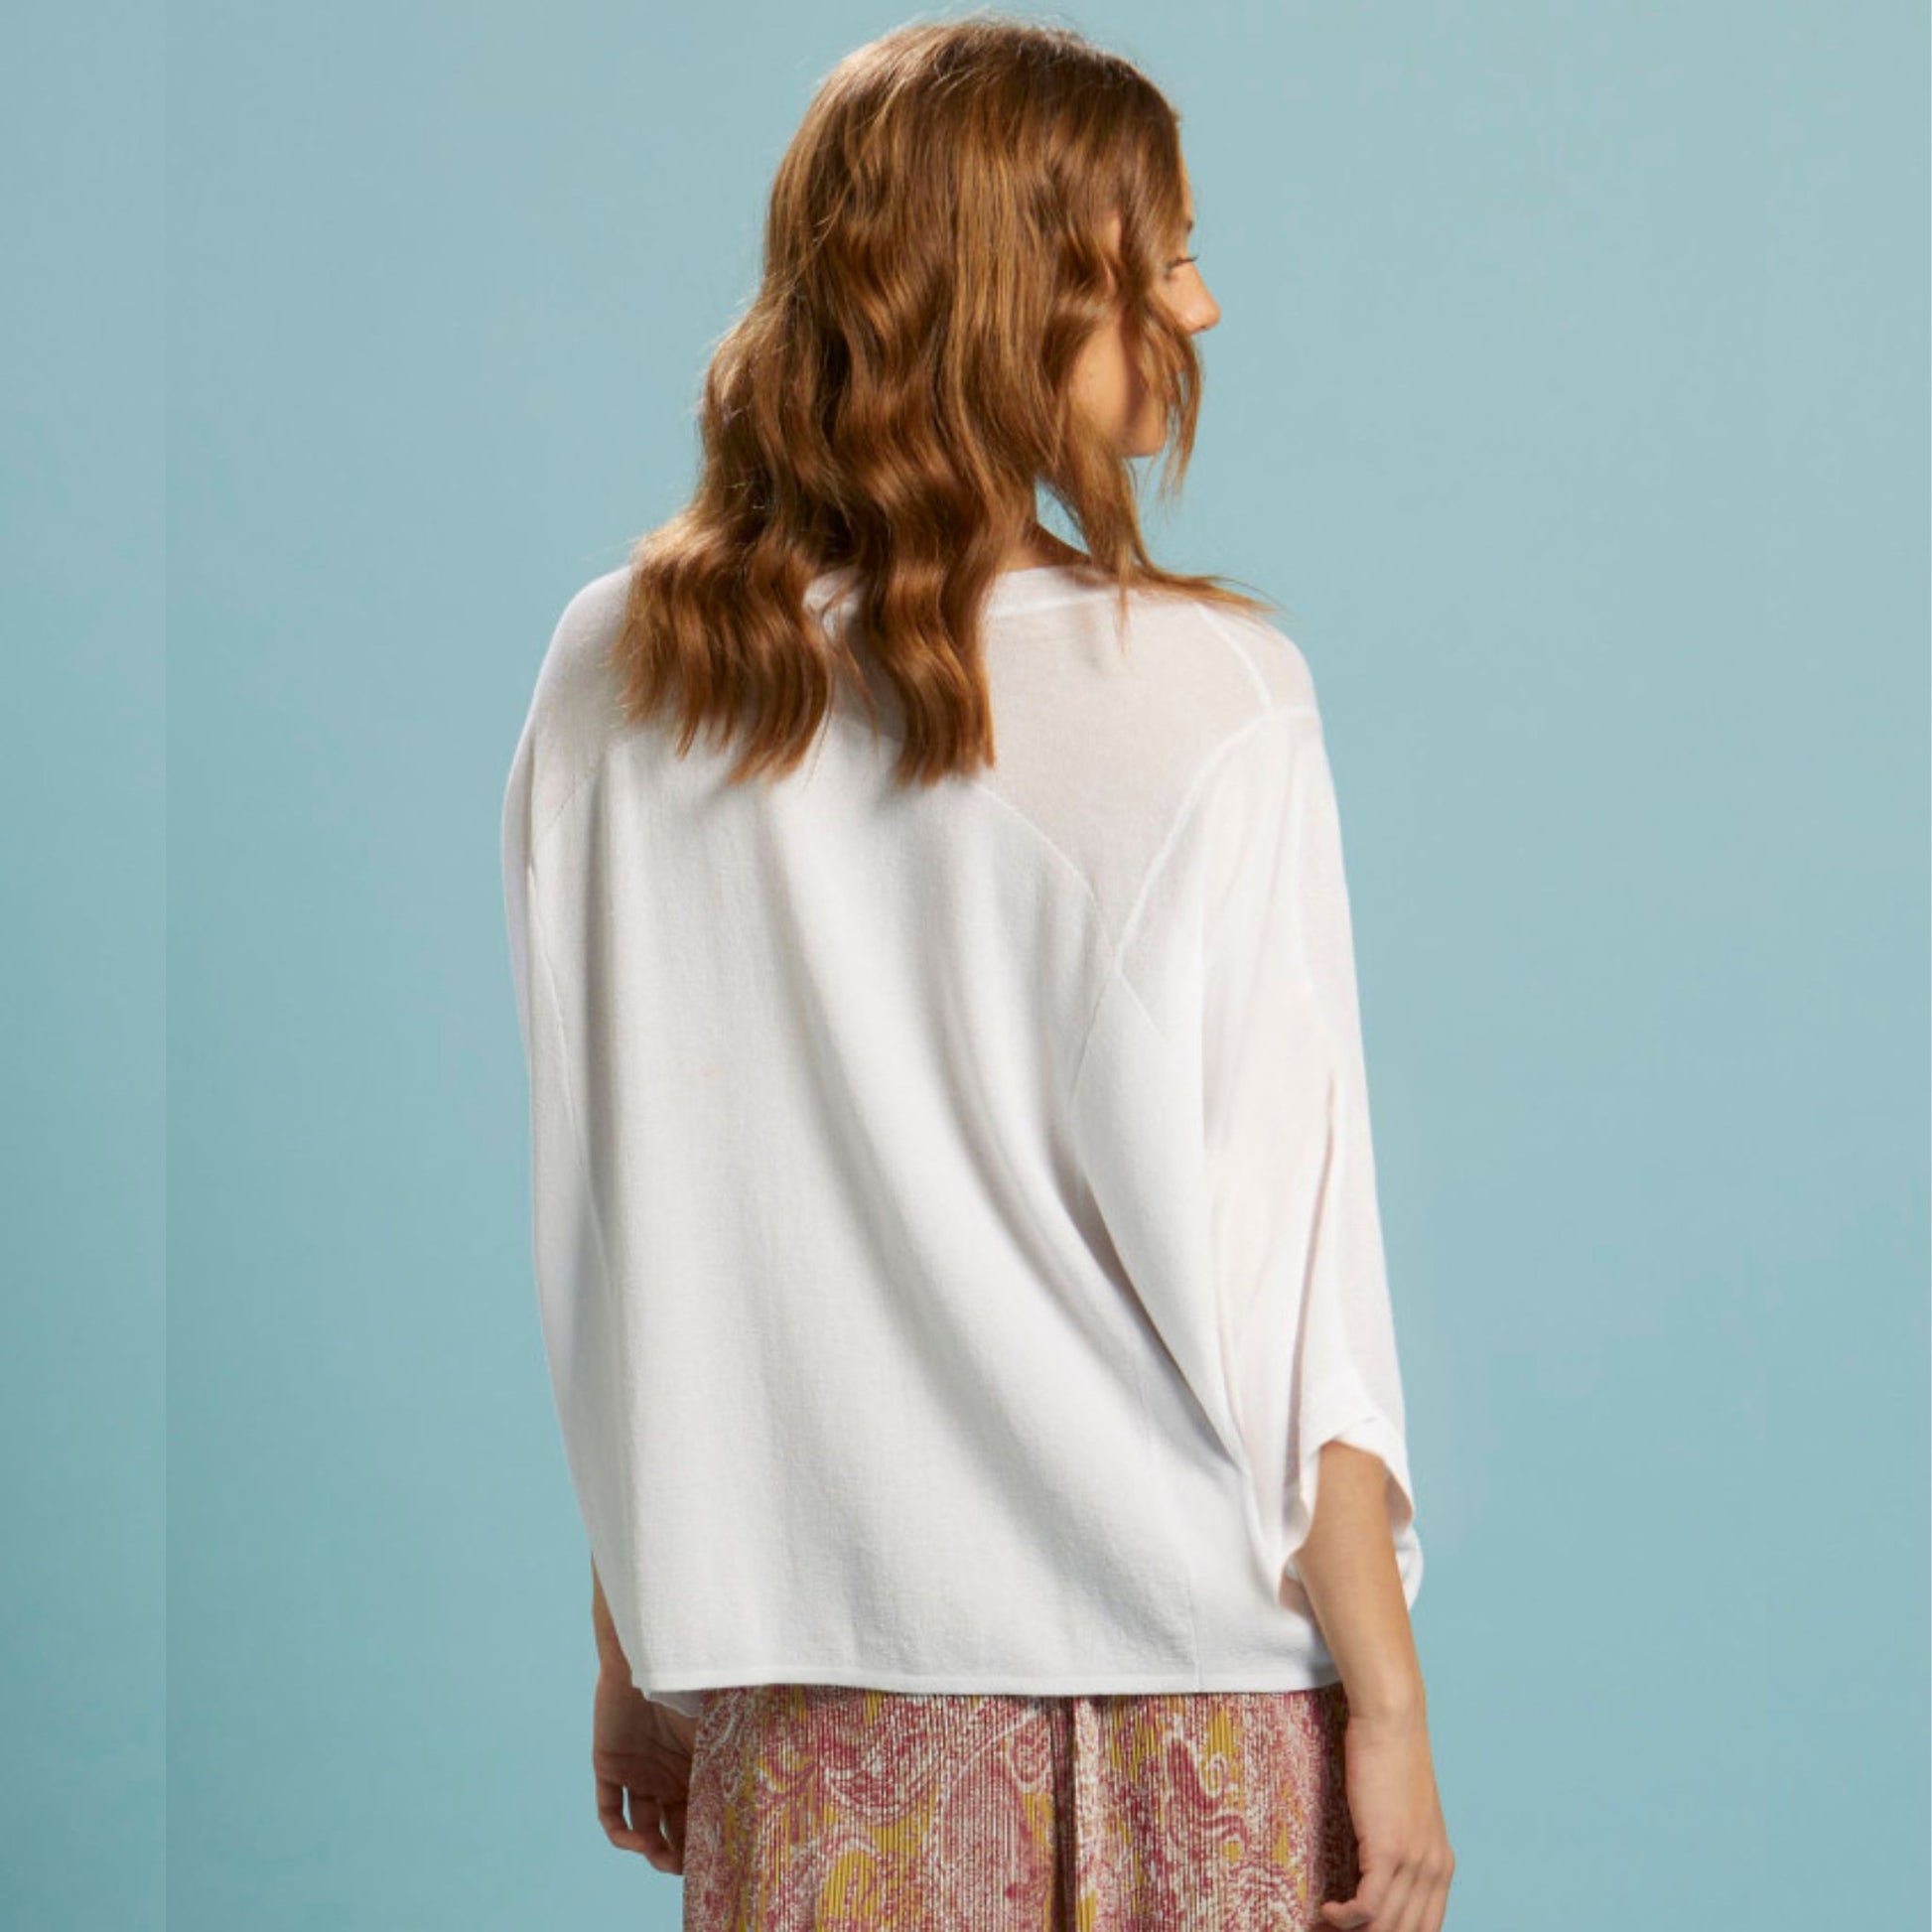 The boat neck shape on the Celestial knit from FATE + BECKER adds a touch of sophistication to any outfit. With a hi/lo hem and side splits, this lightweight knit in white achieves a modern and stylish look.